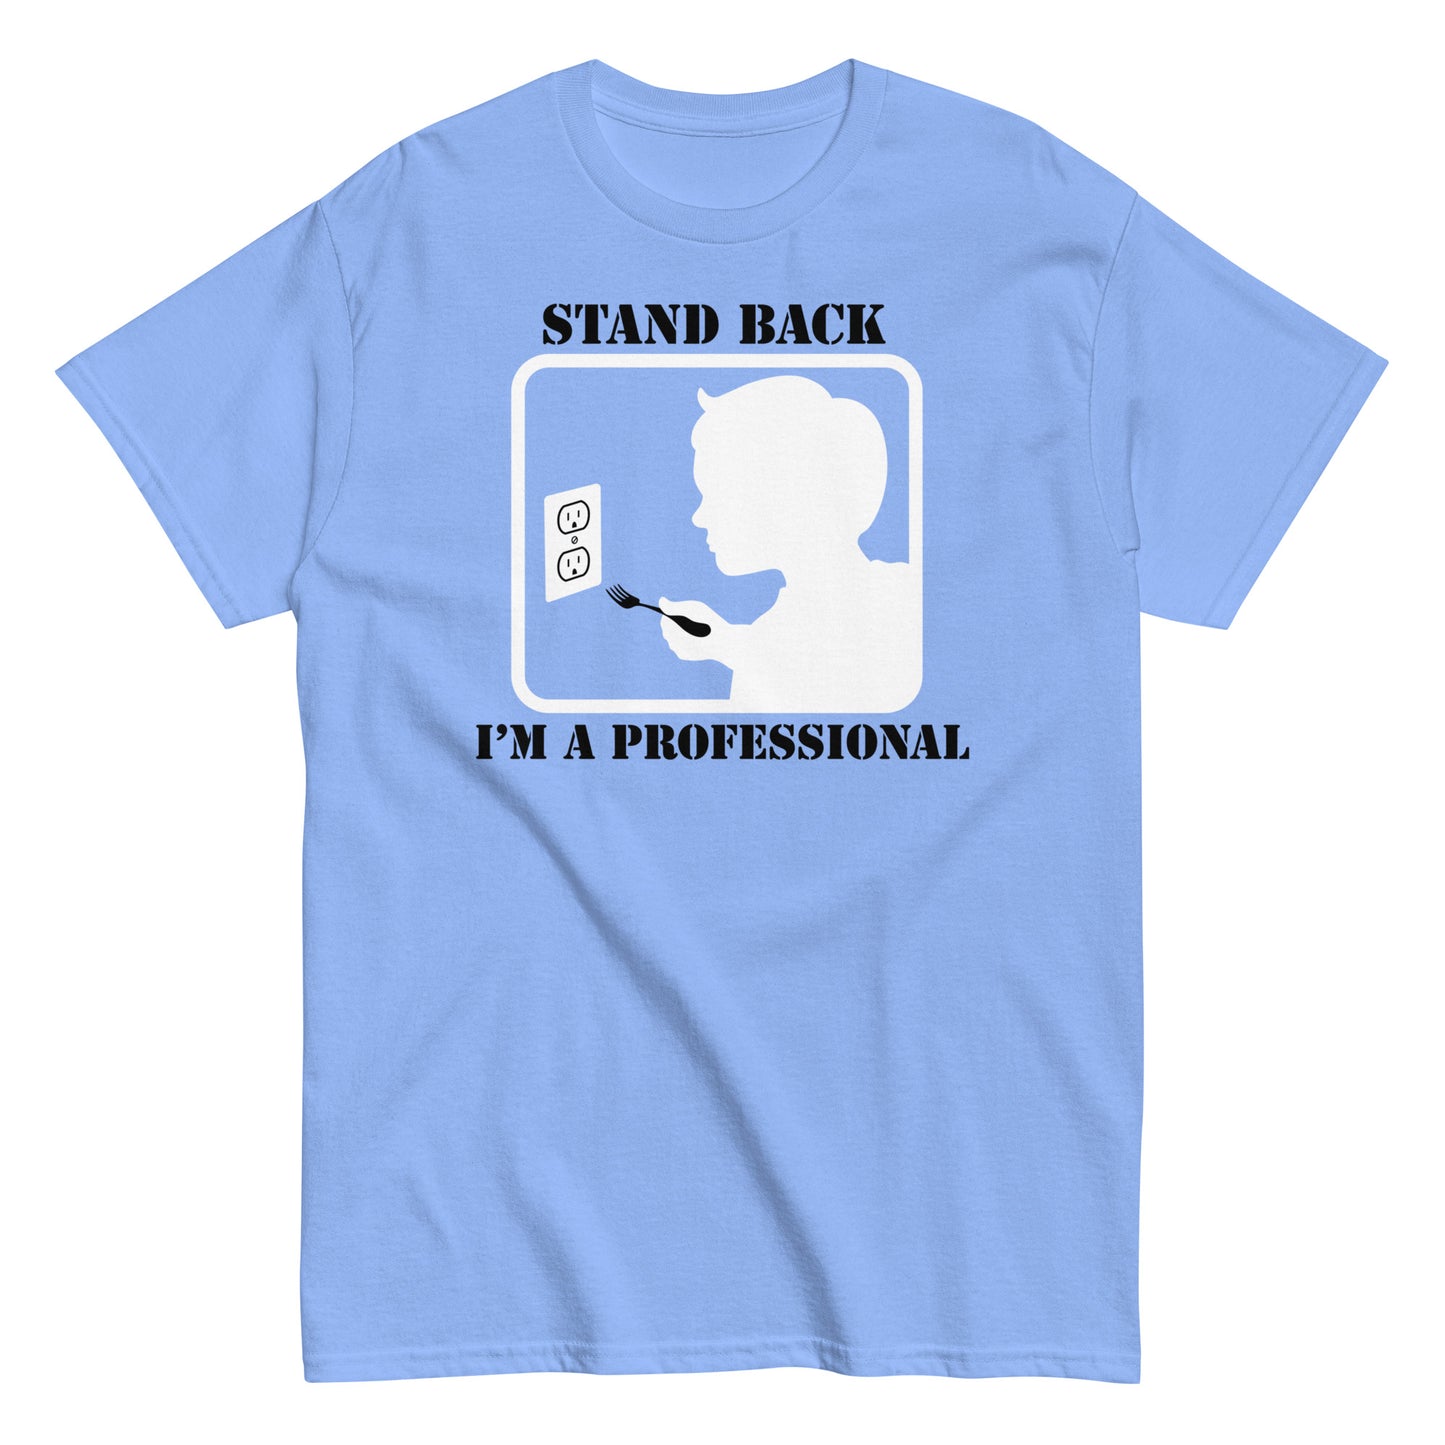 Stand Back, I'm A Professional Men's Classic Tee